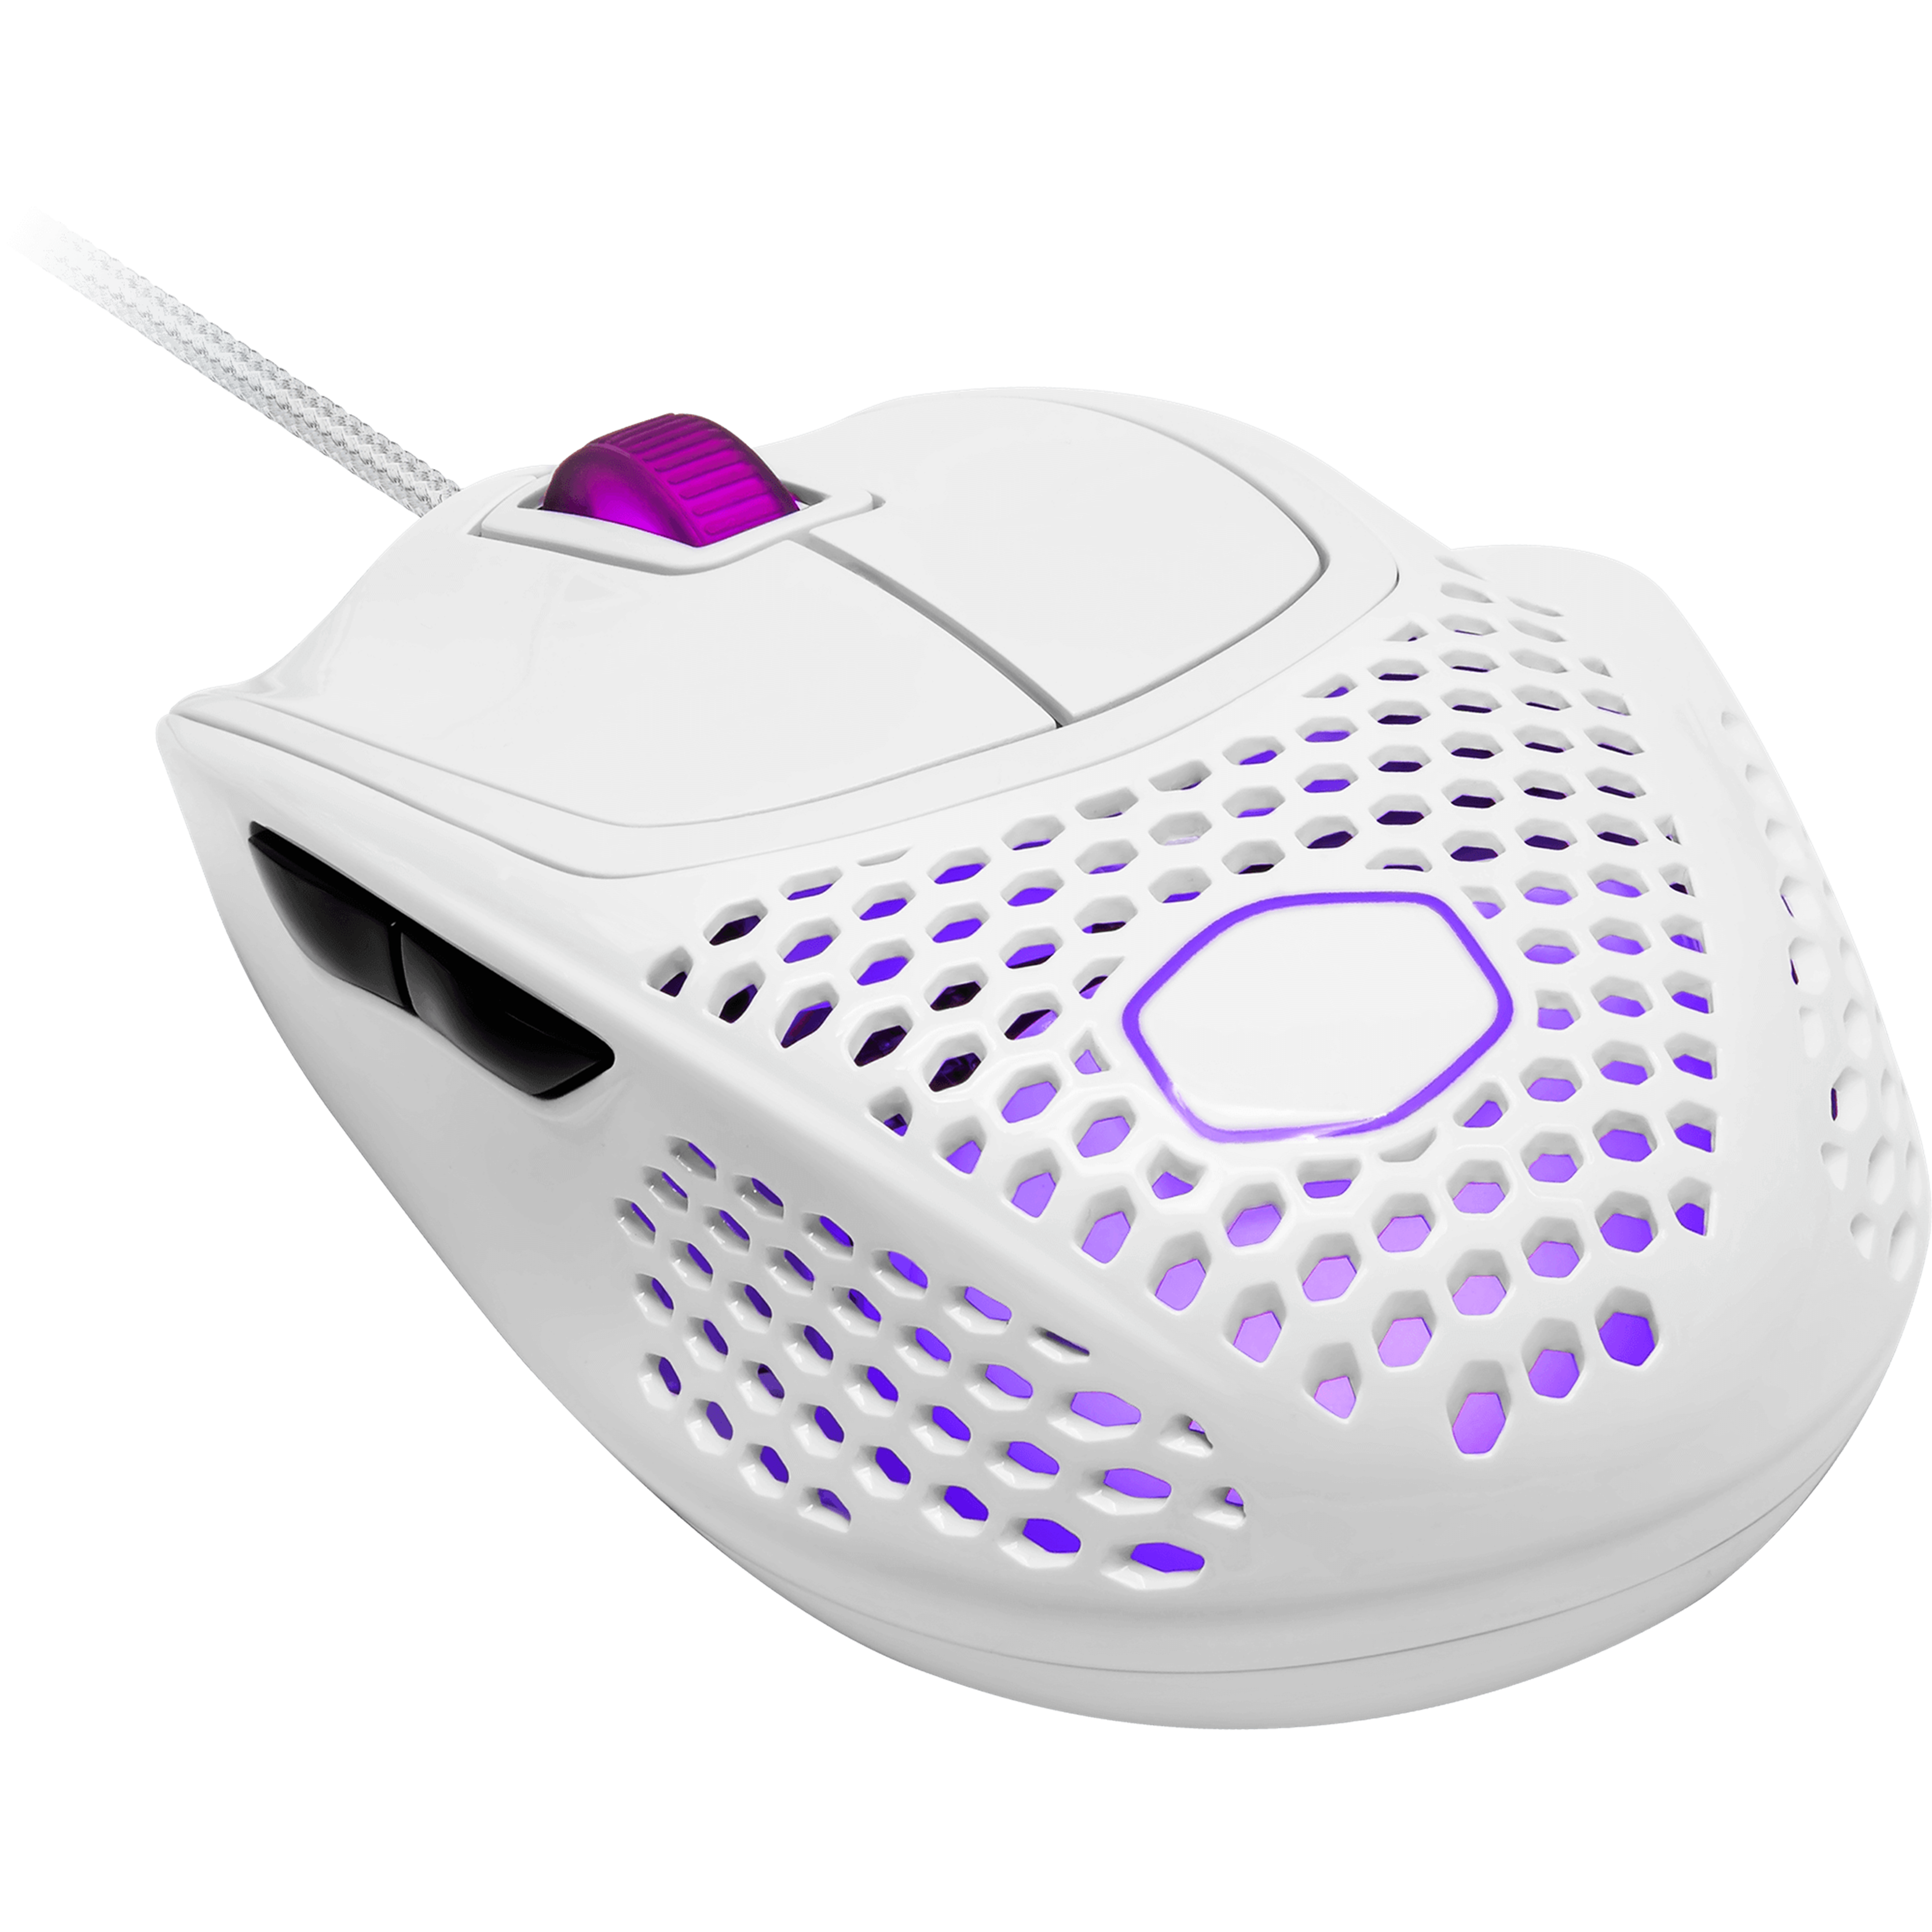 Cooler Master MM-720-WWOL1 MasterMouse MM720 Gaming Mouse - Matte White 